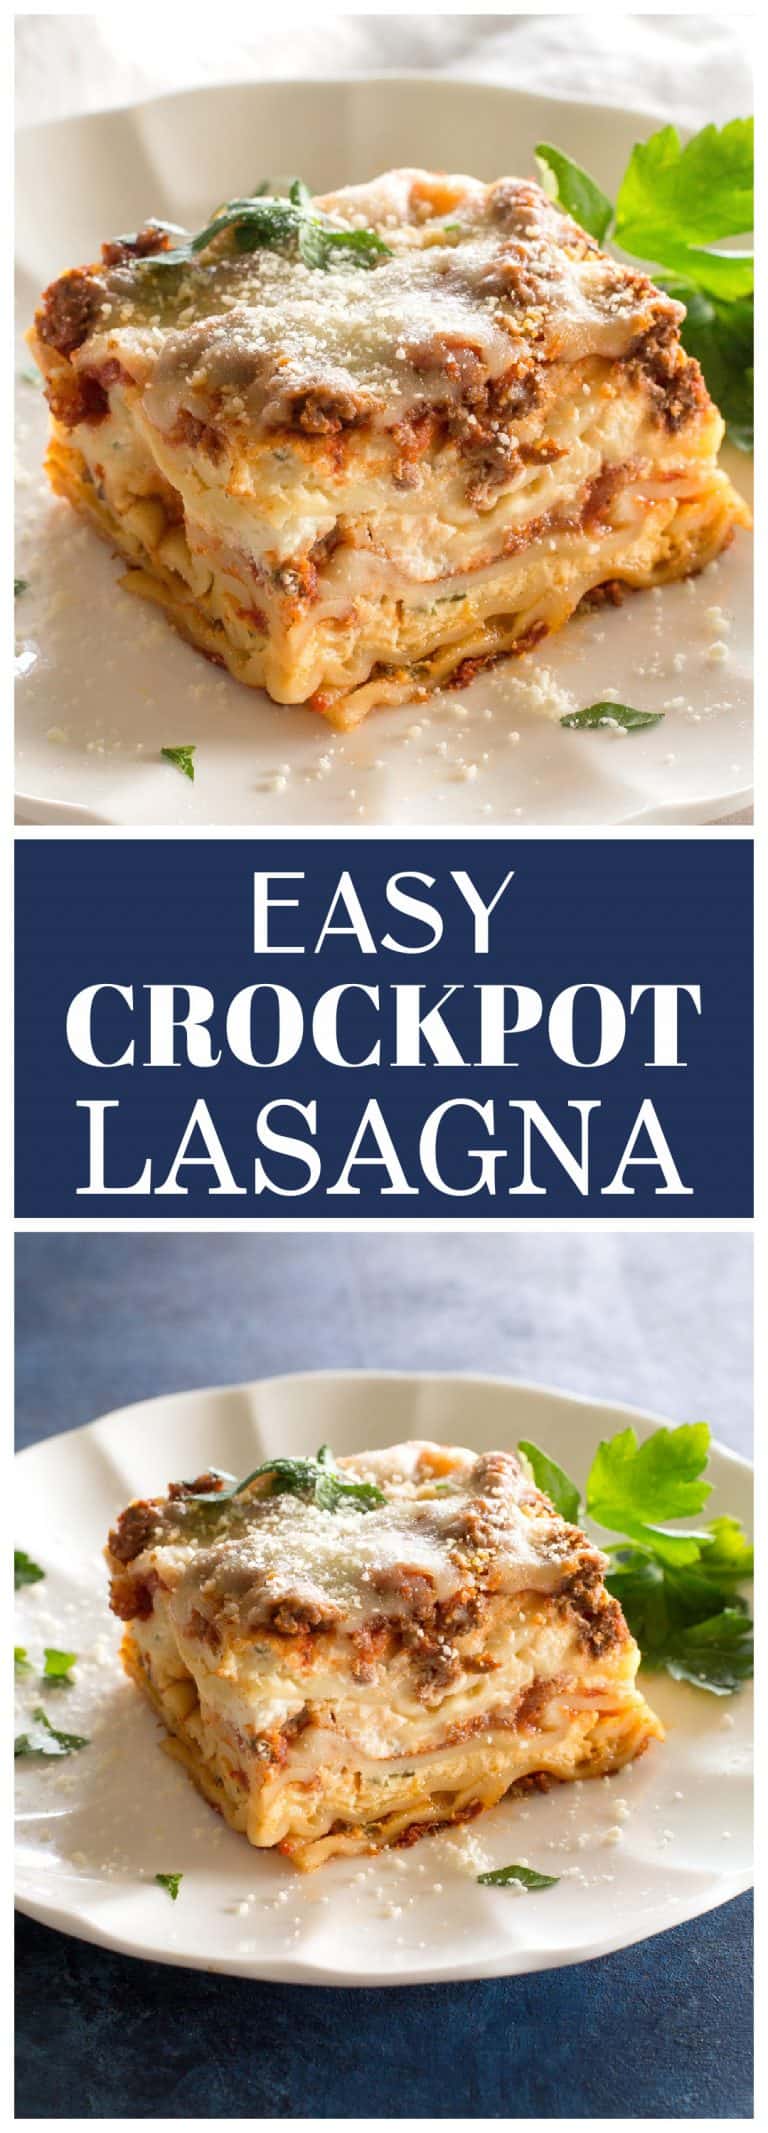 Crockpot Lasagna Recipe - The Girl Who Ate Everything